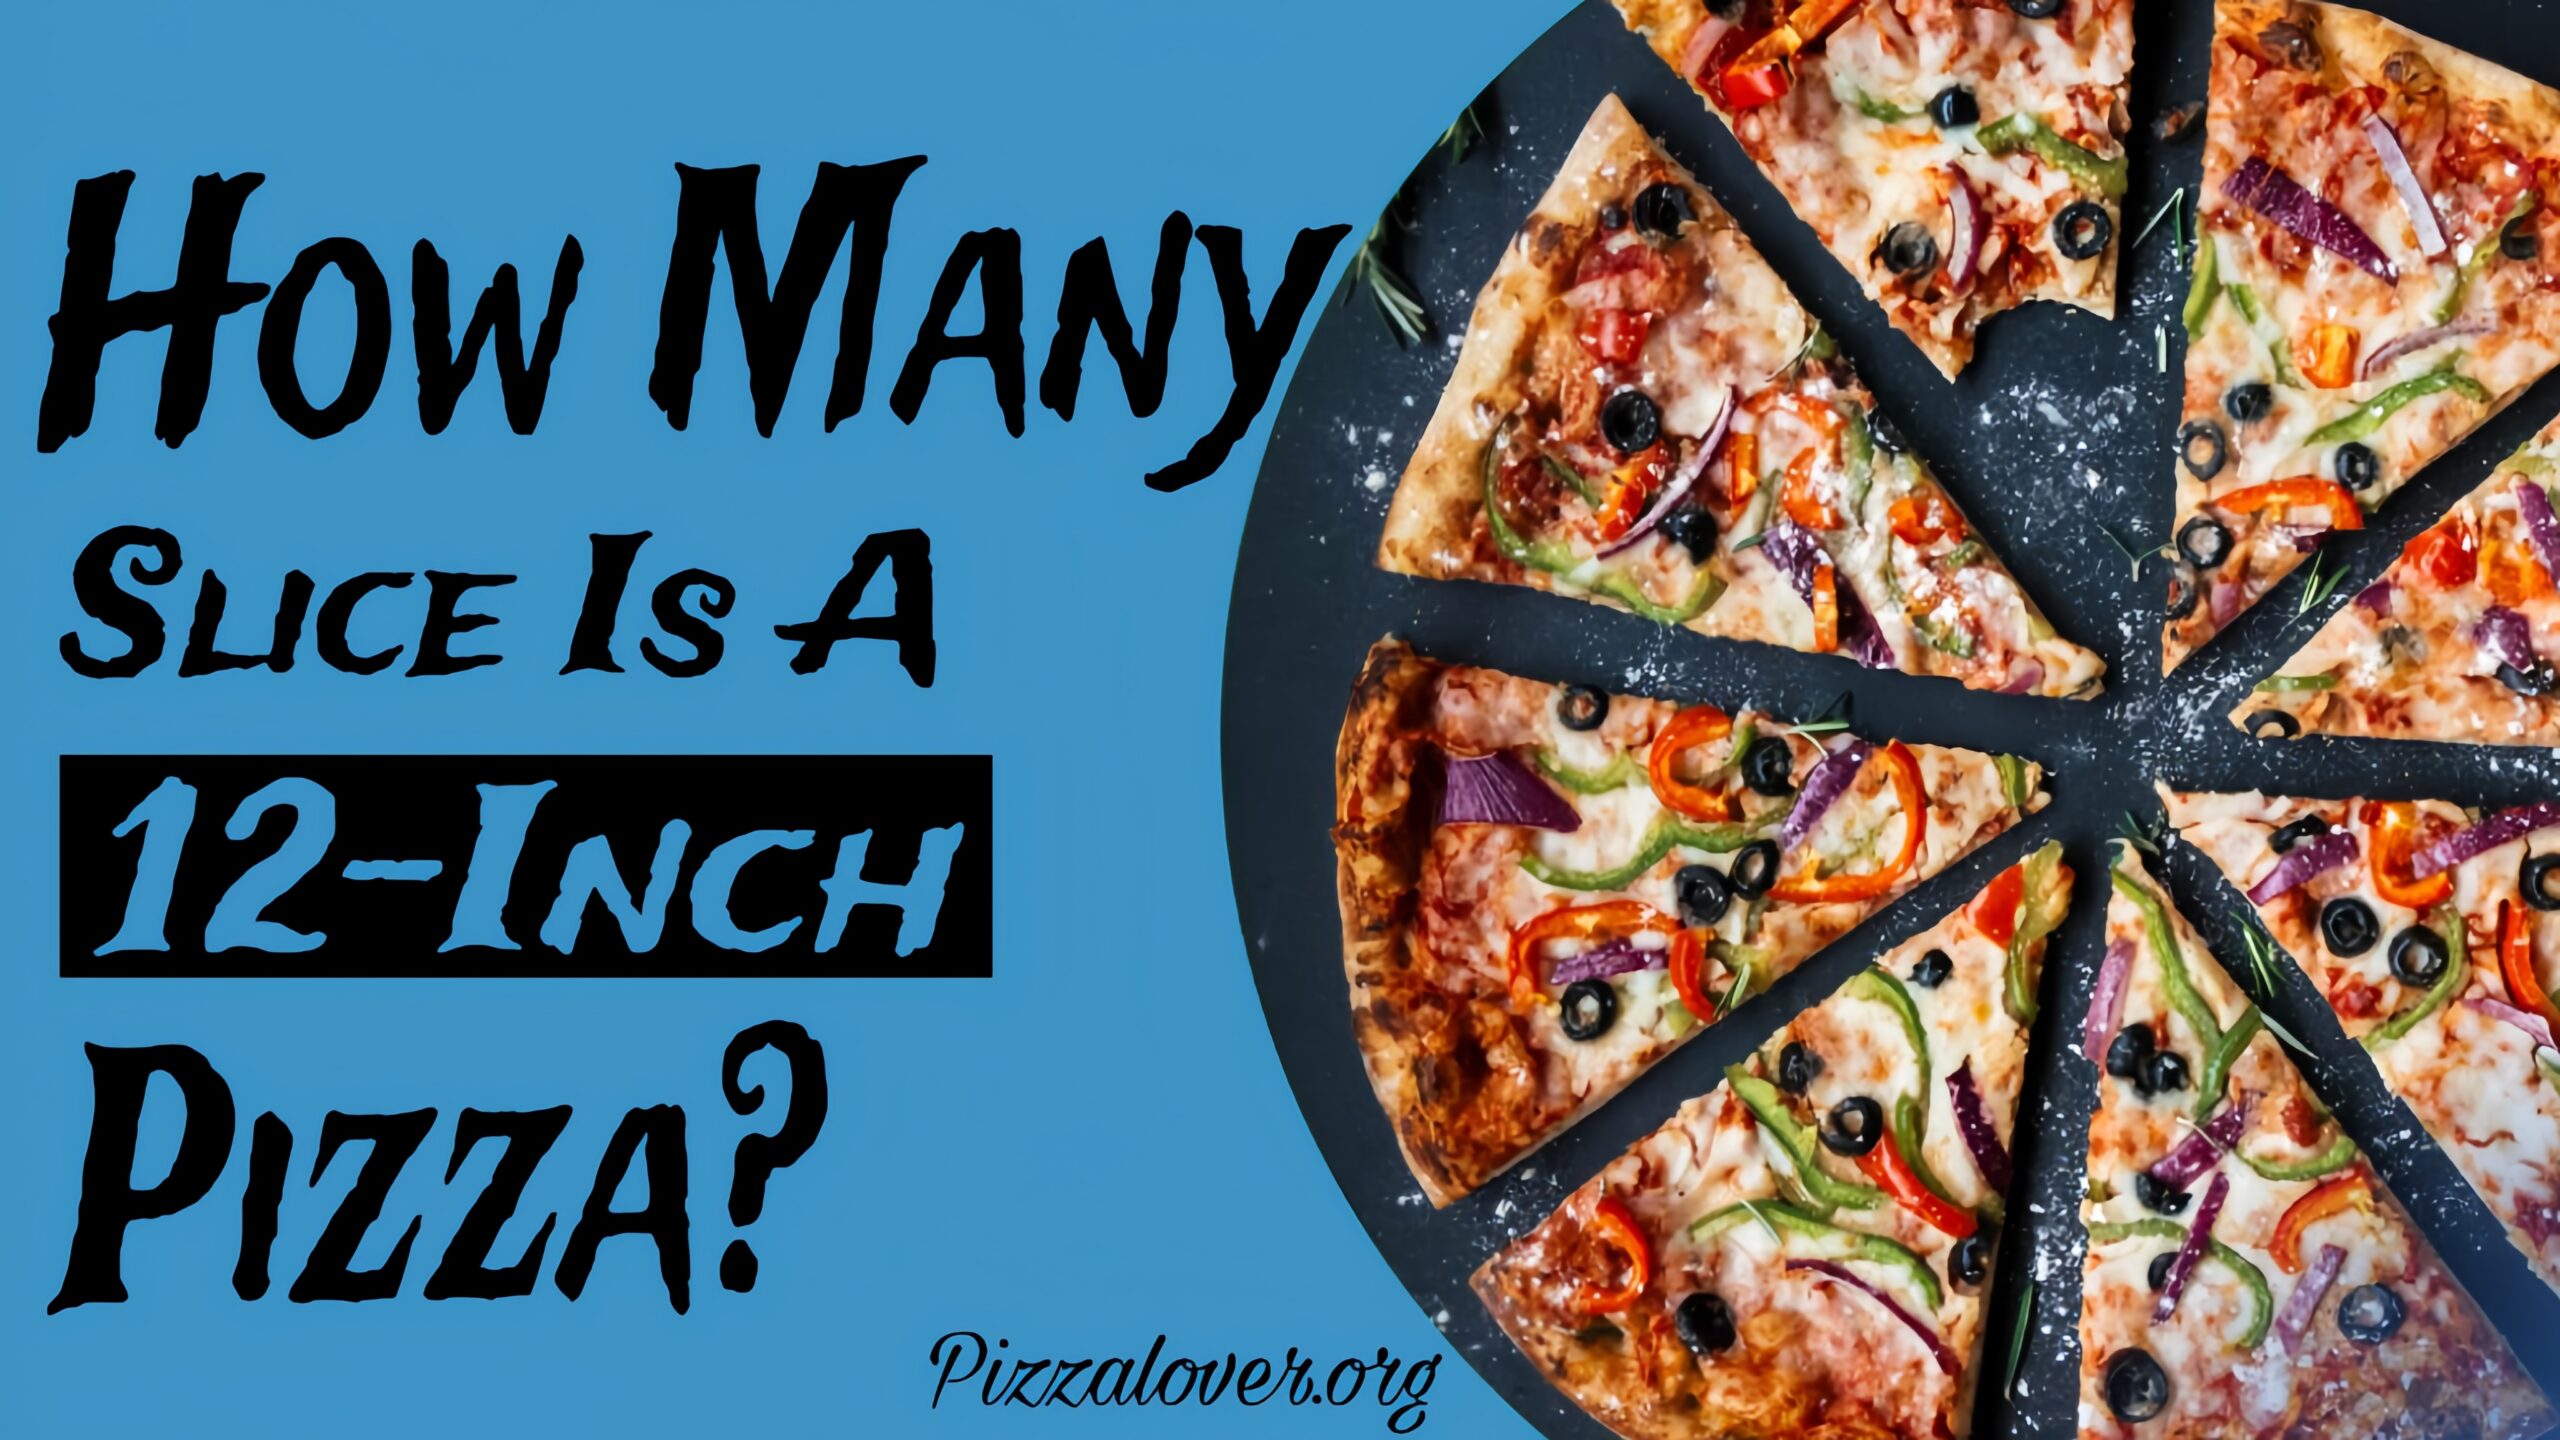 How Many Slices Is a 12-inch Pizza?